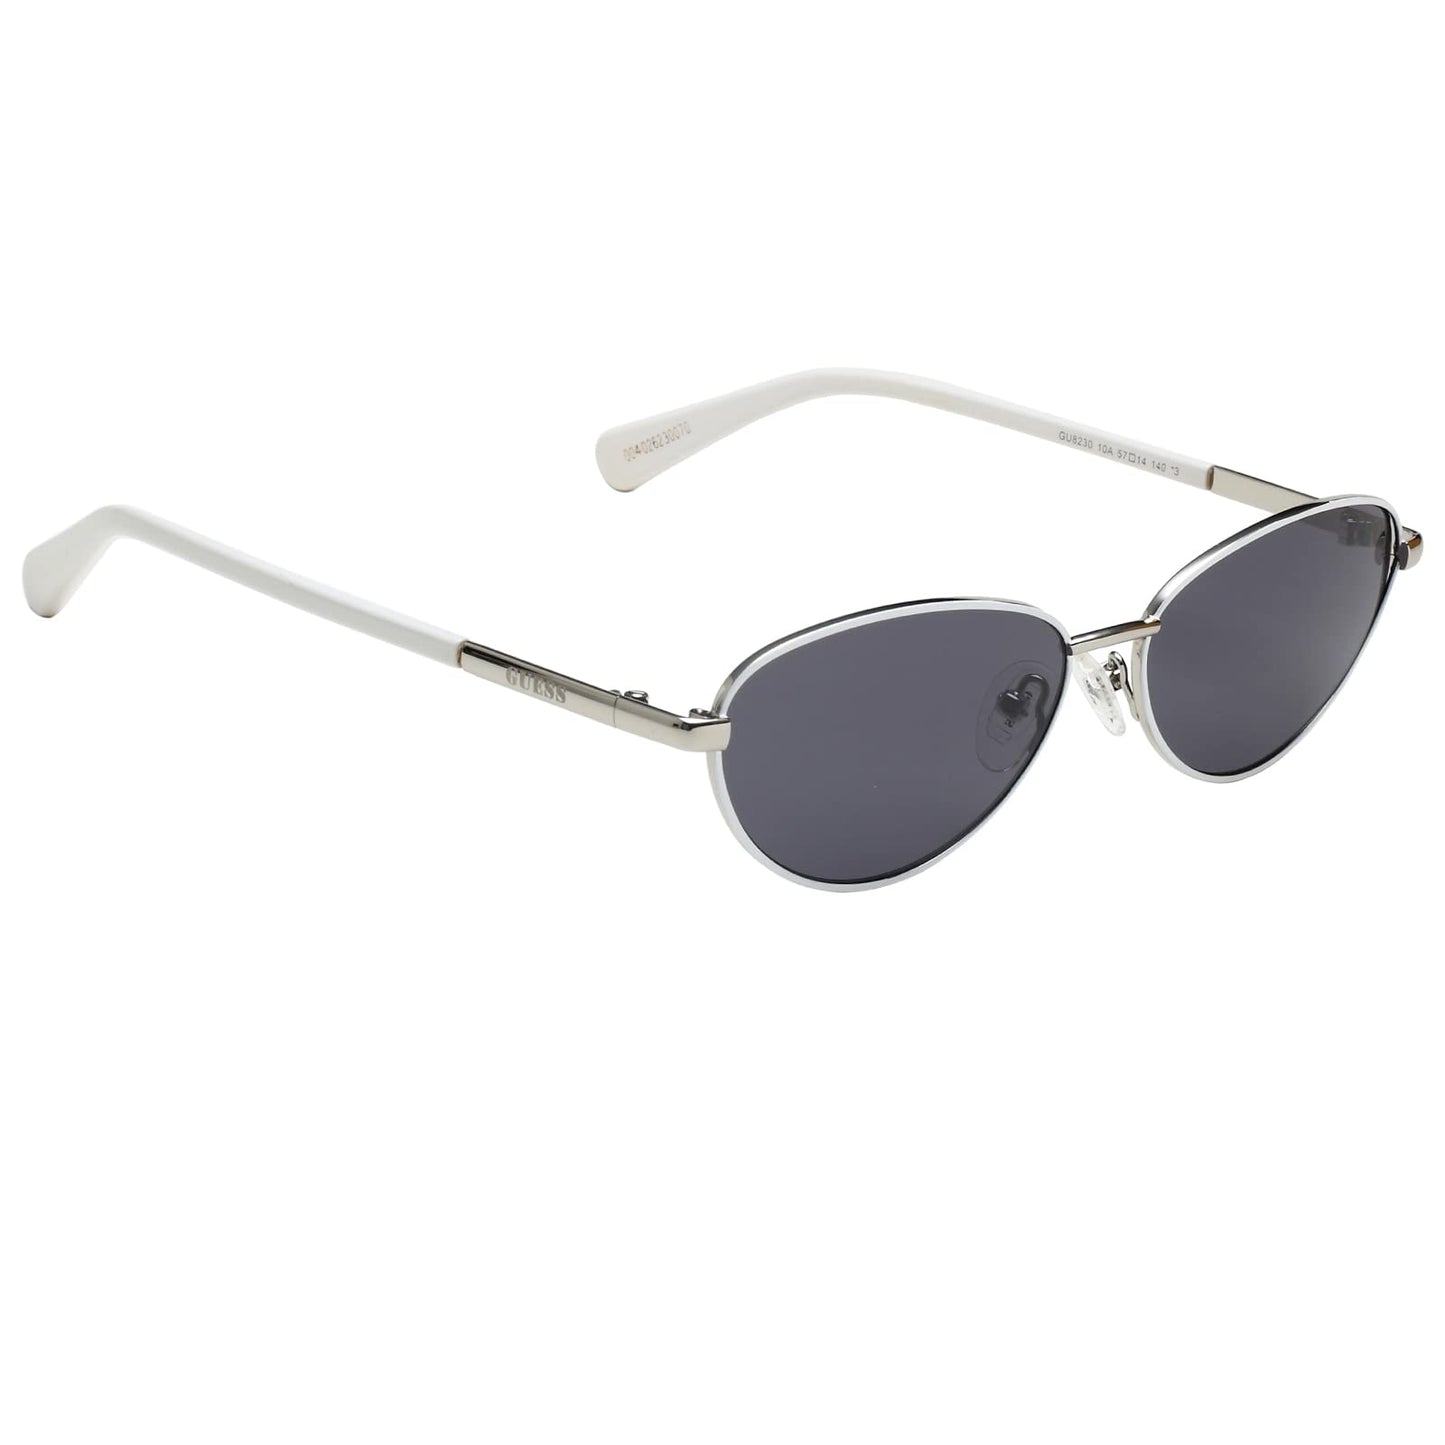 Guess Solid Oval Unisex Sunglasses - (GU8230 10A 57 S |57| Grey Color Lens)